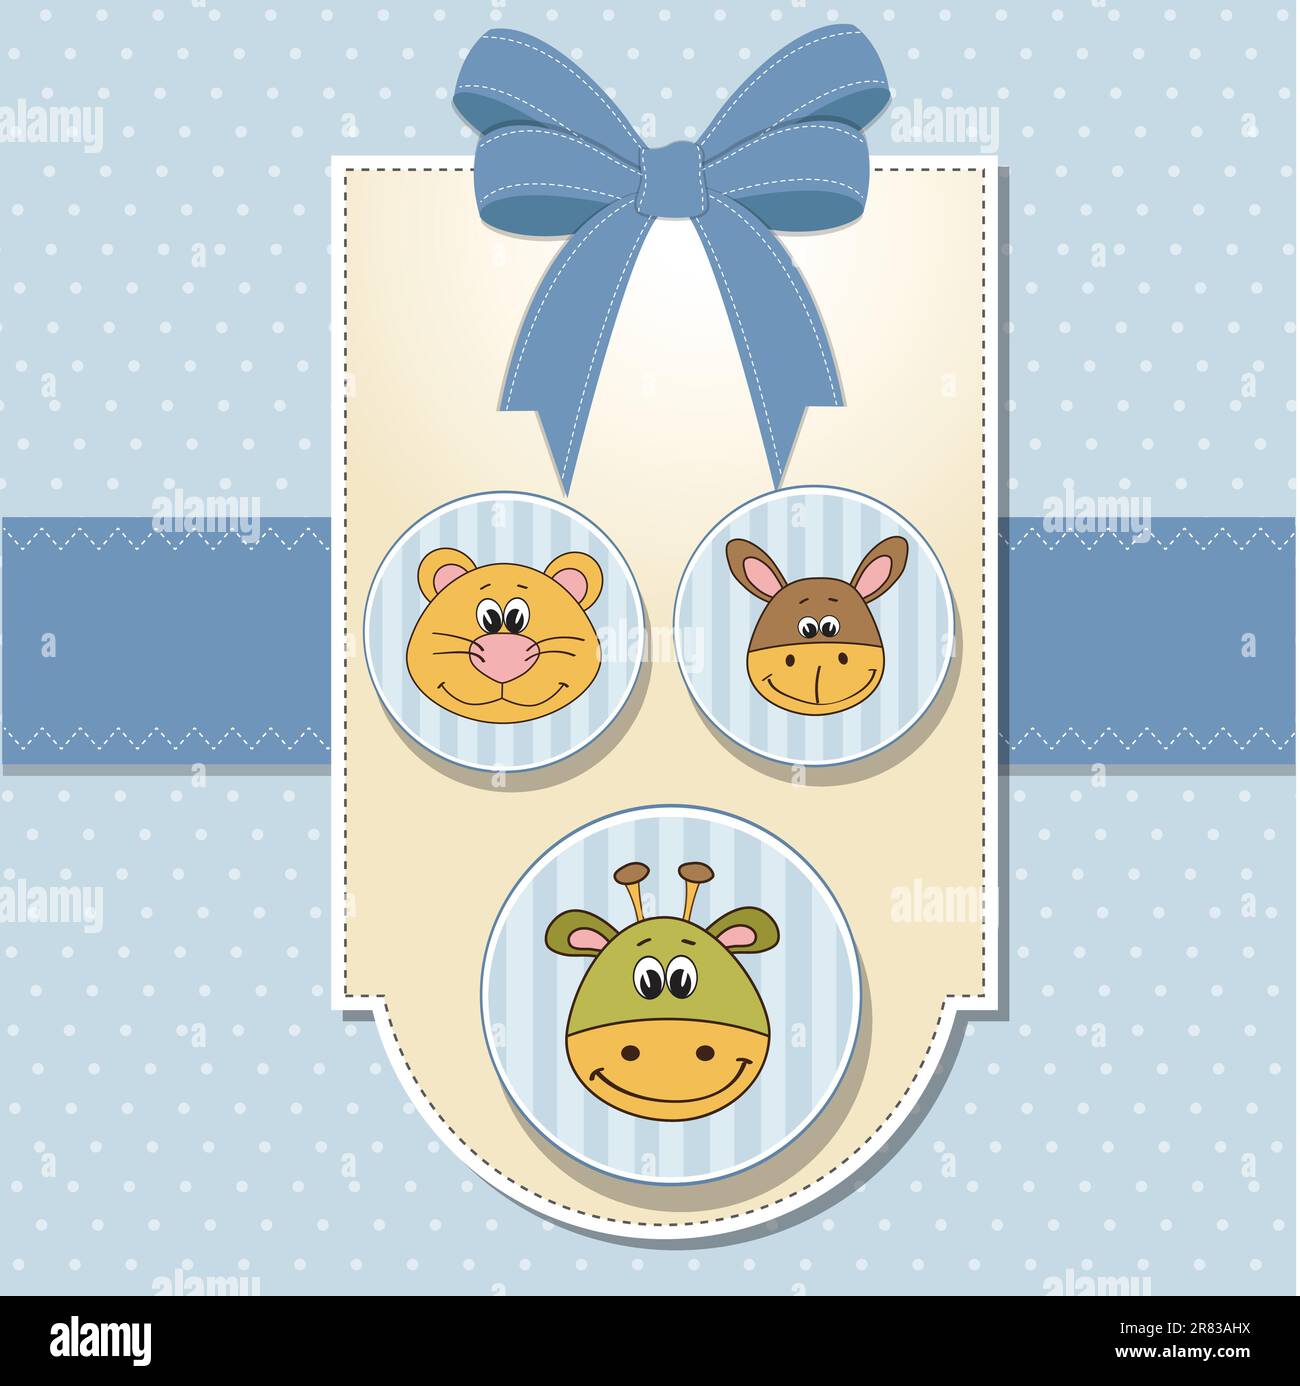 baby shower card Stock Vector